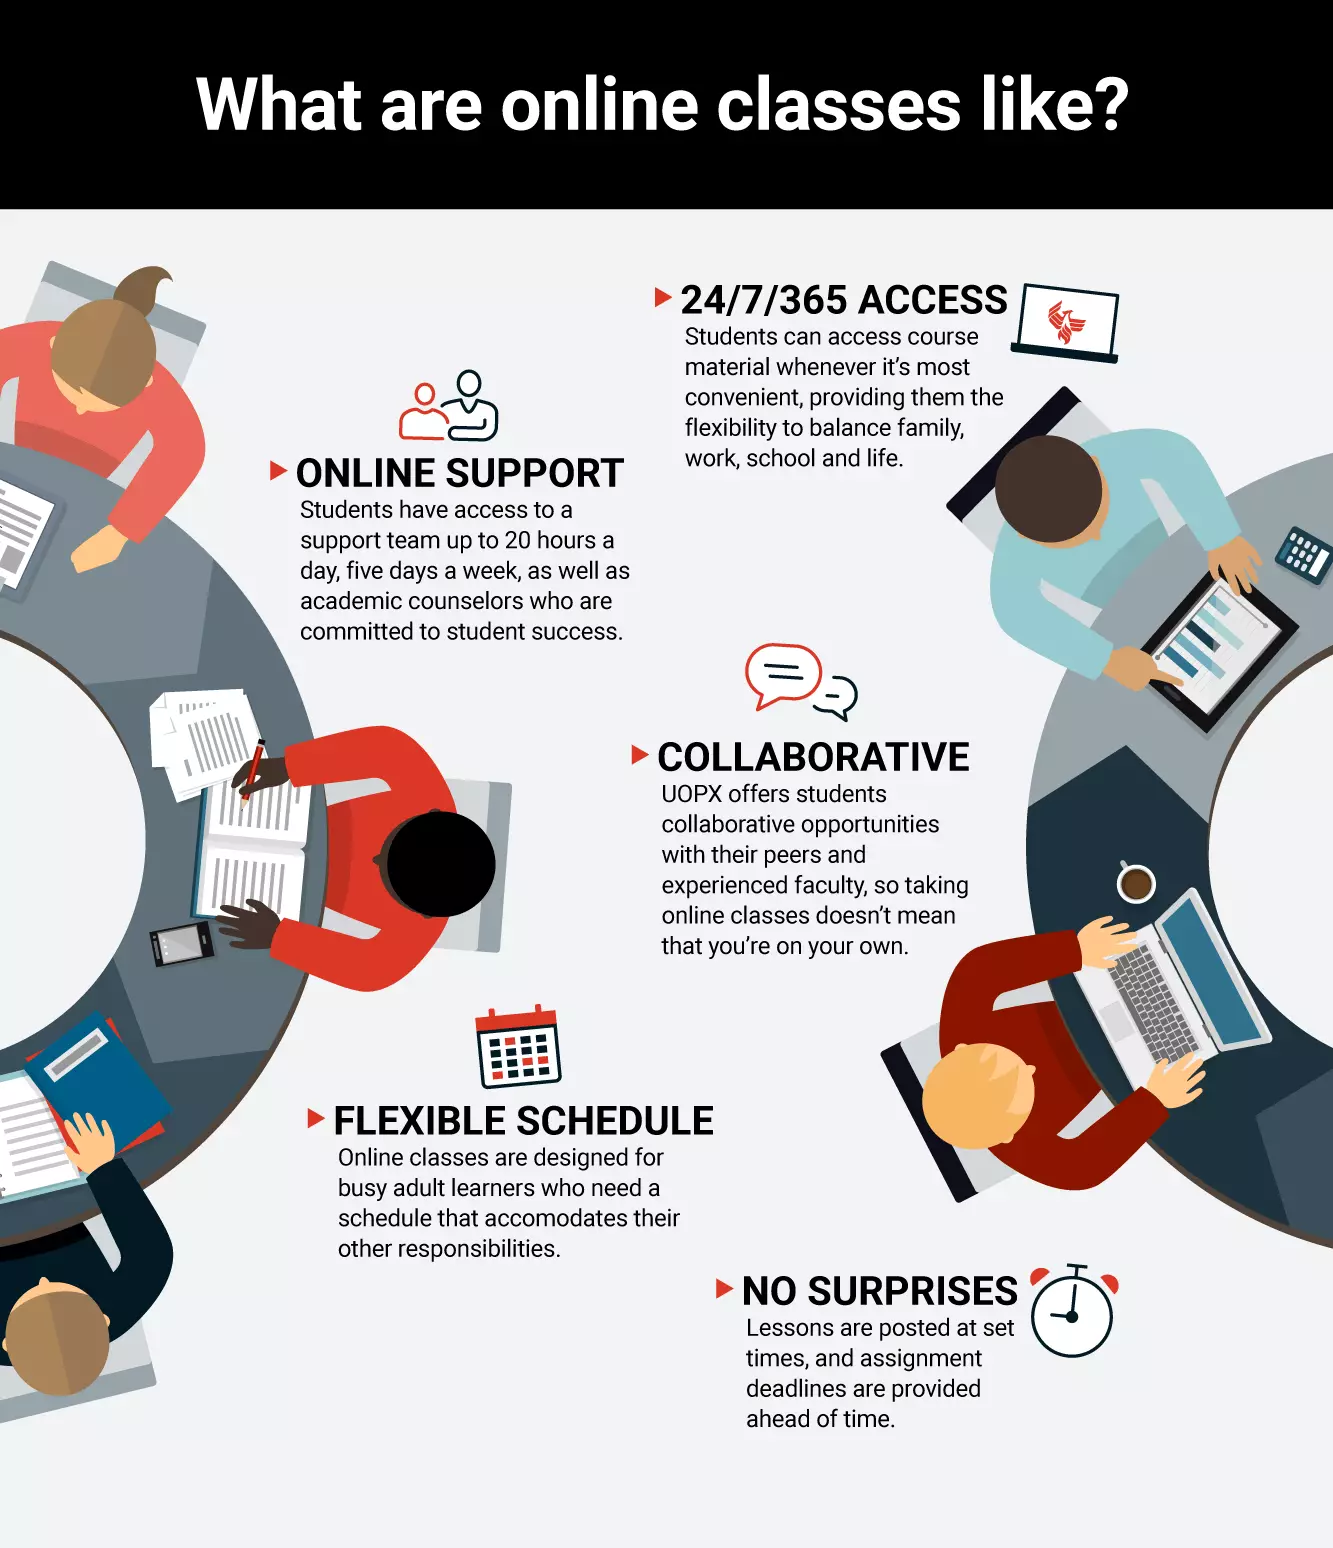 Infographic on online classes